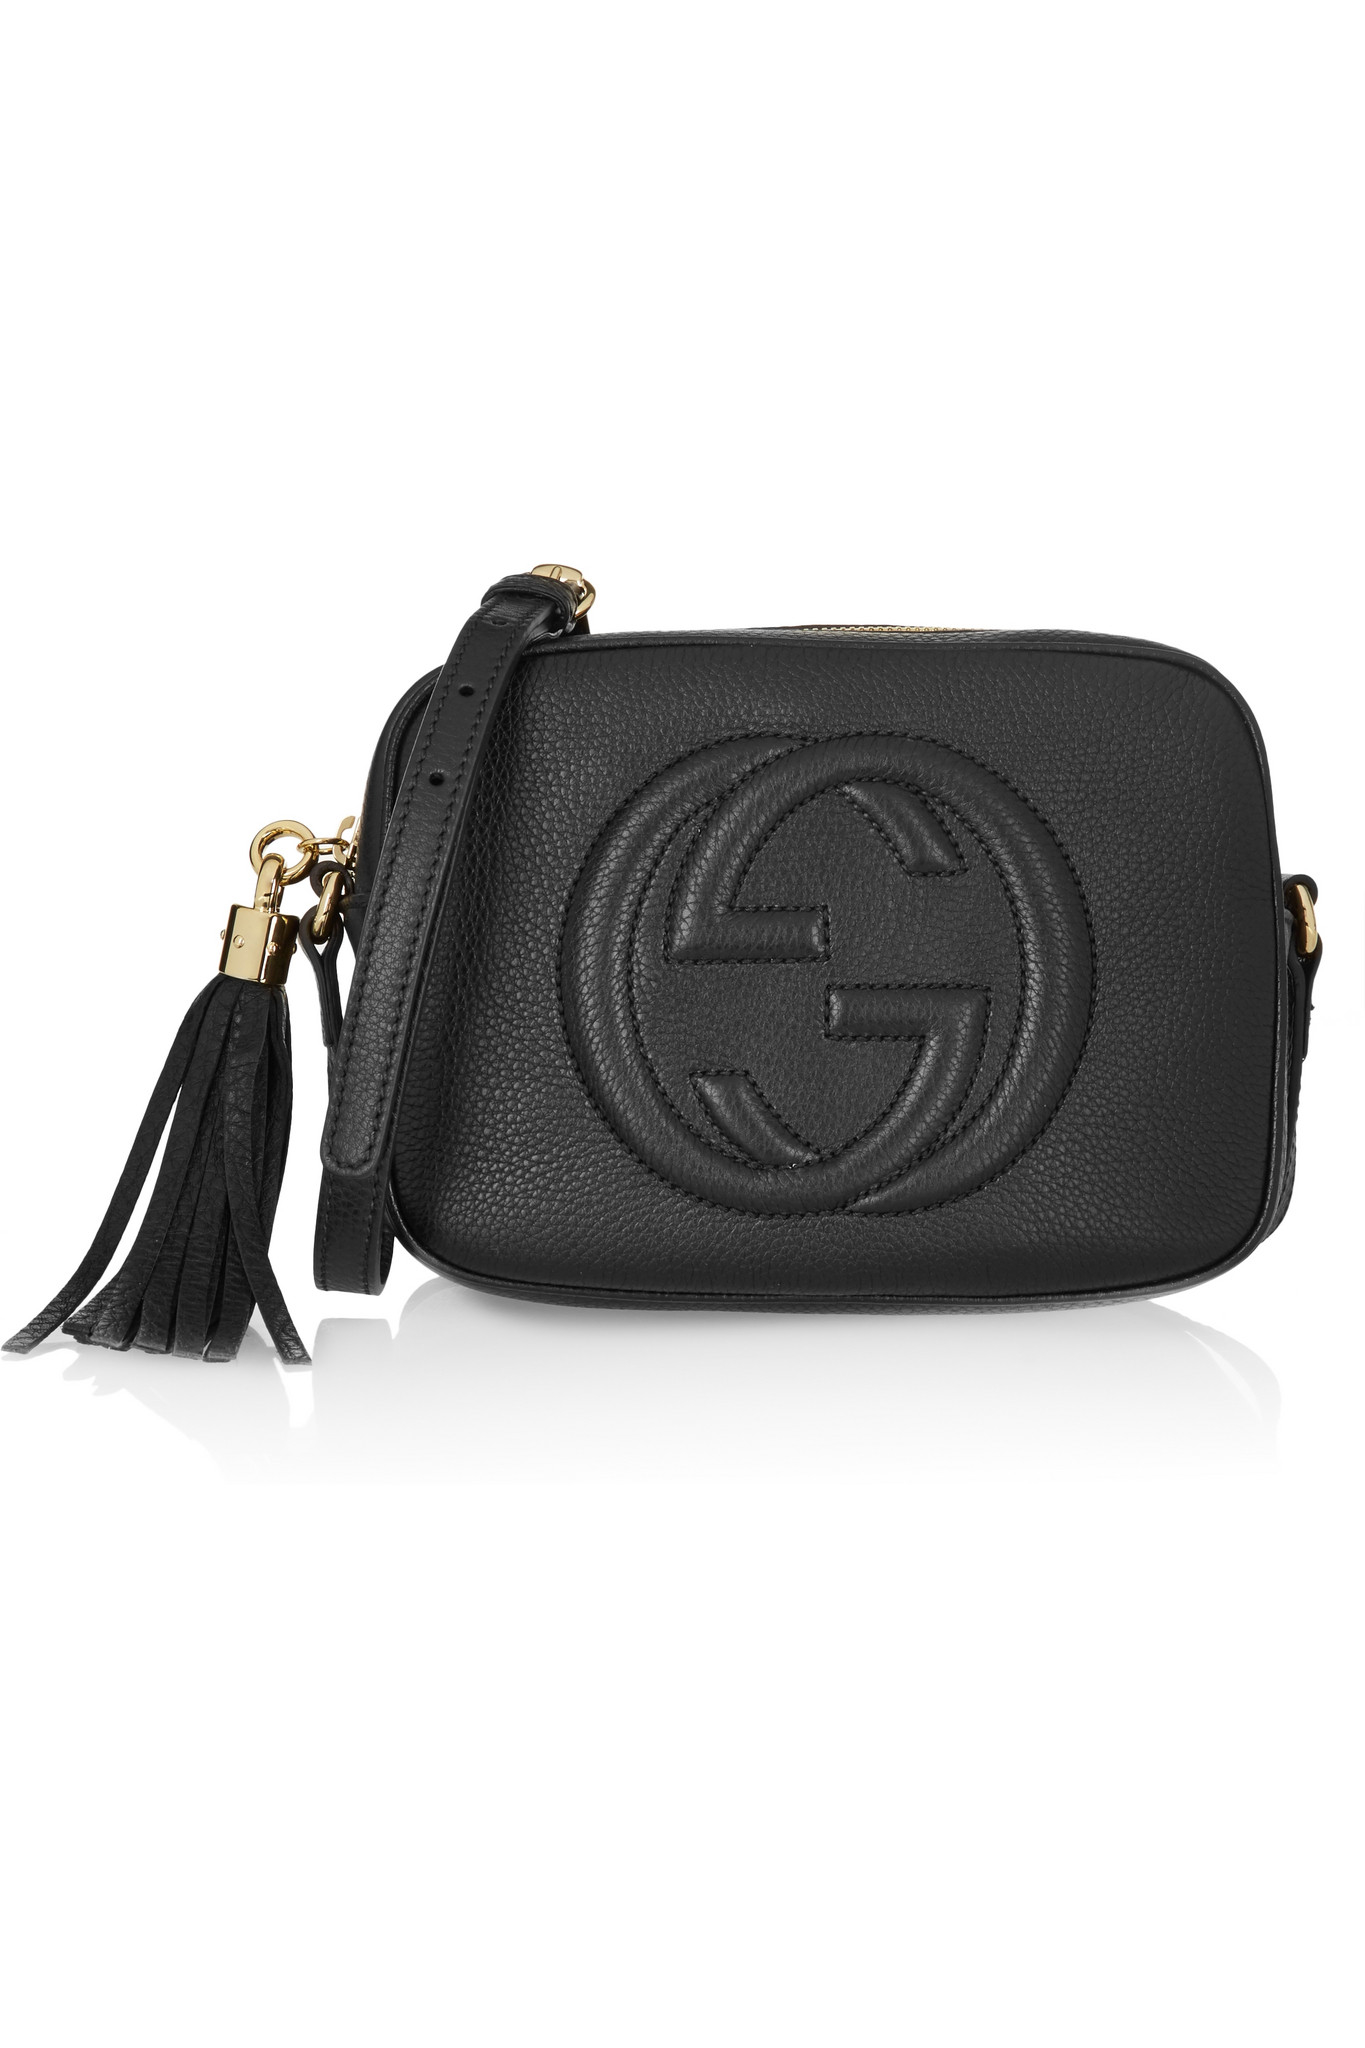 Gucci Soho Disco Textured-leather Shoulder Bag in Black | Lyst